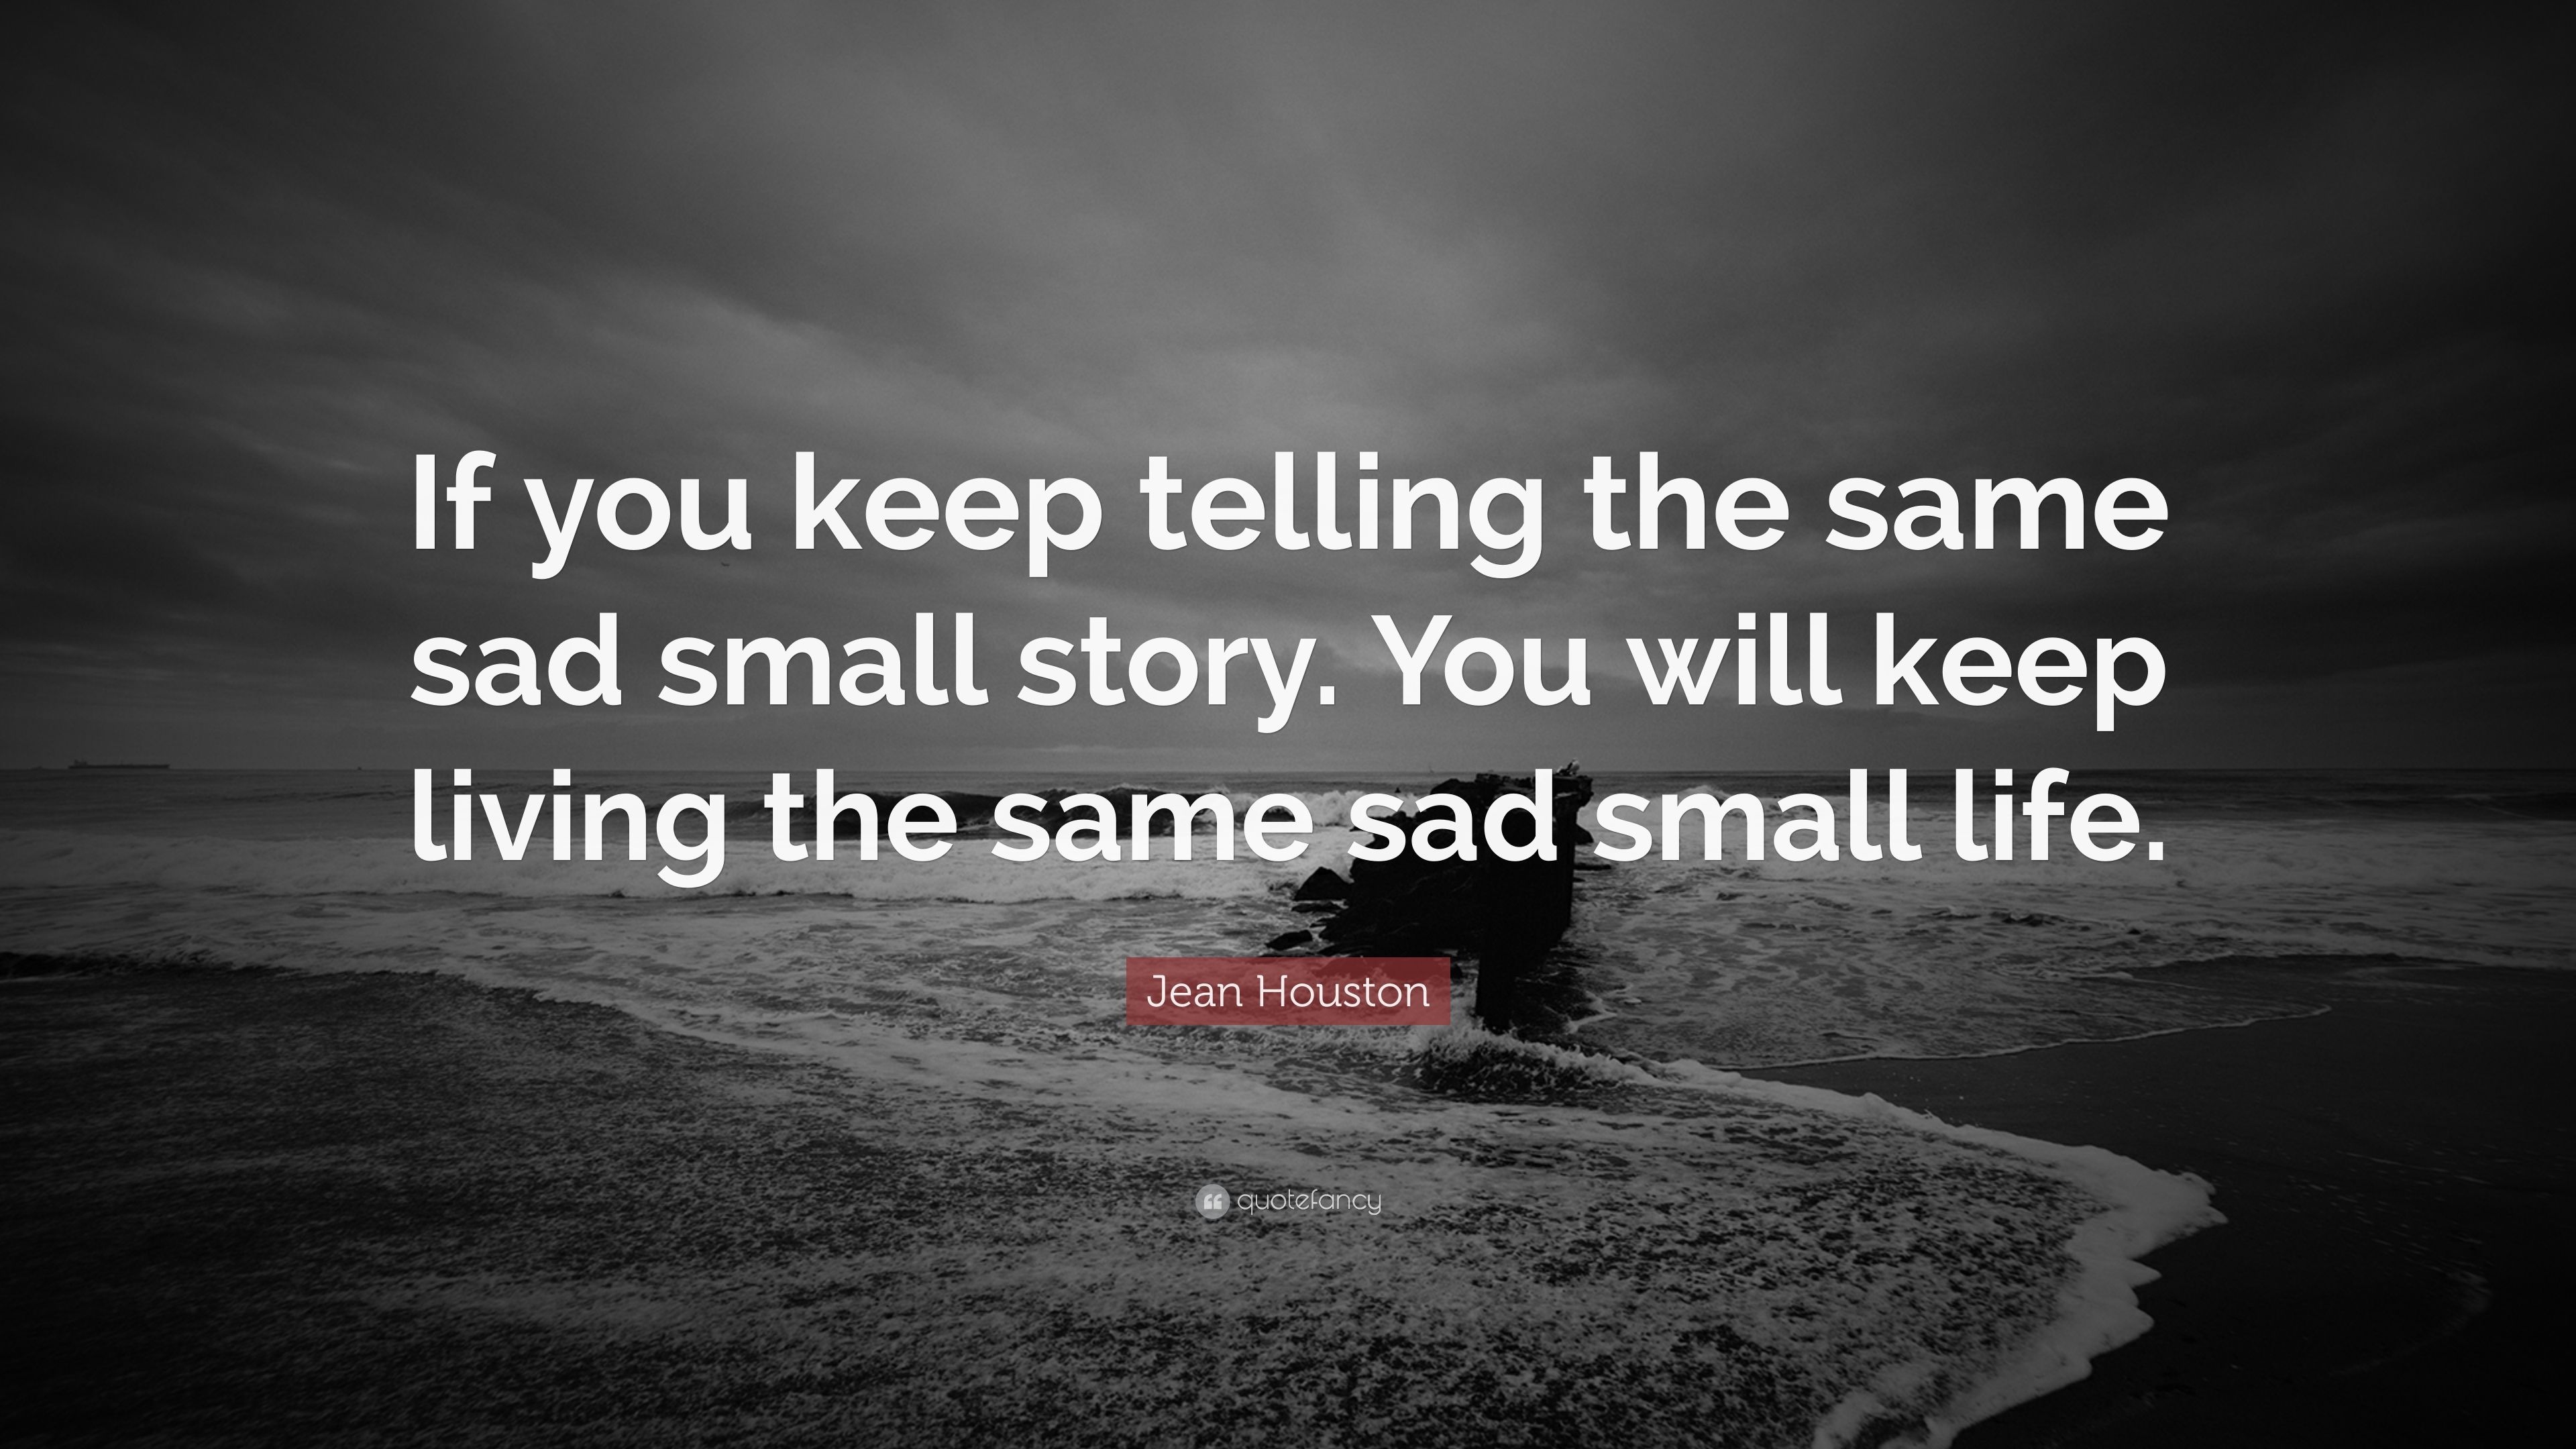 Jean Houston Quote: “If you keep telling the same sad small story. You will keep living the same sad small life.” (7 wallpaper)